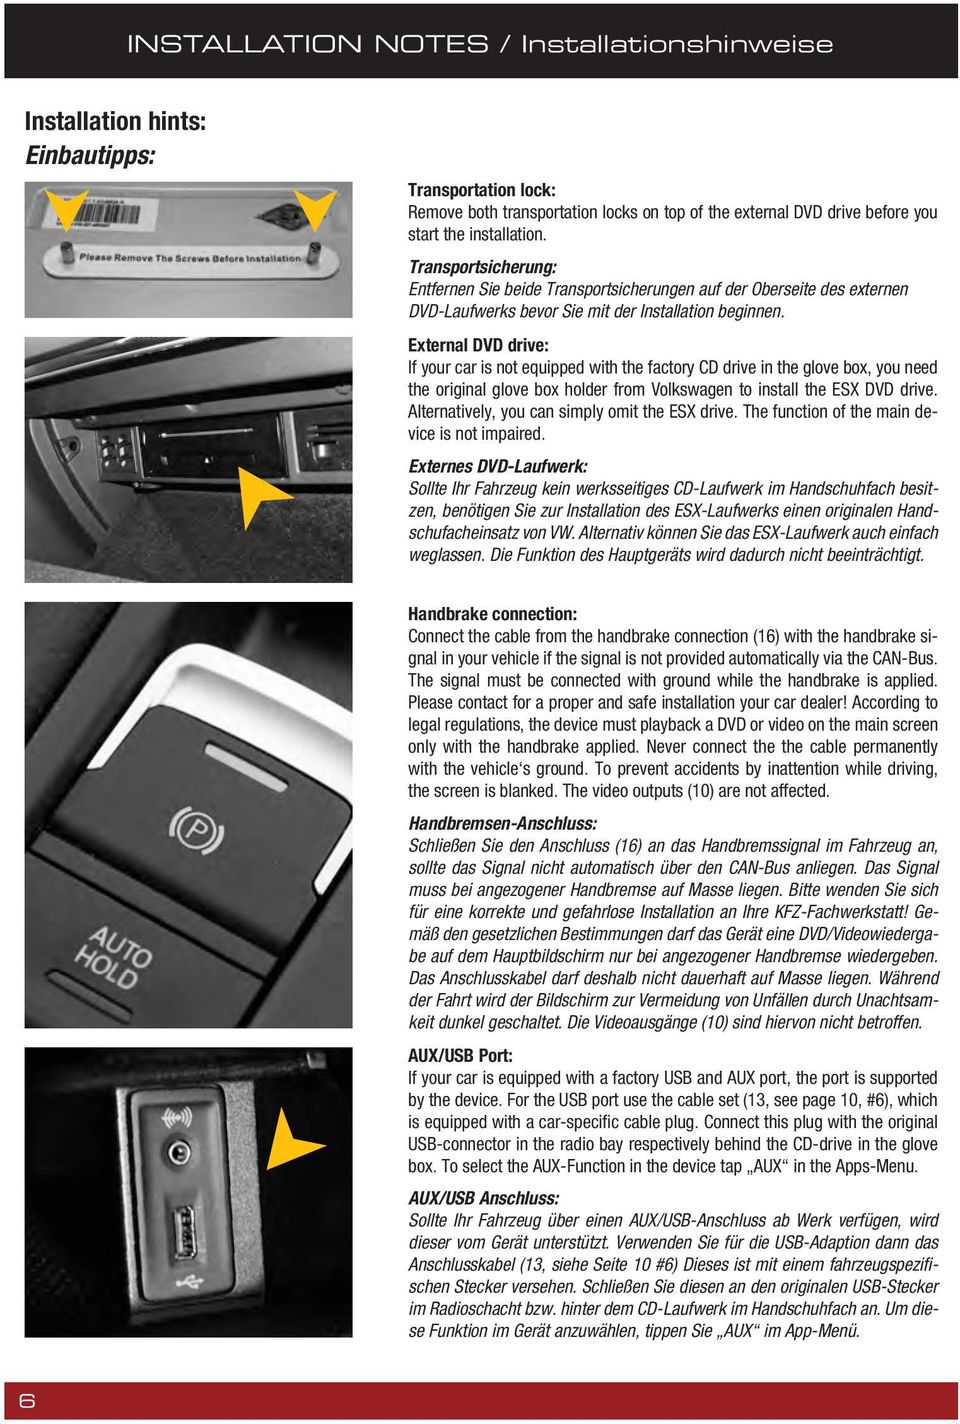 External DVD drive: If your car is not equipped with the factory CD drive in the glove box, you need the original glove box holder from Volkswagen to install the ESX DVD drive.